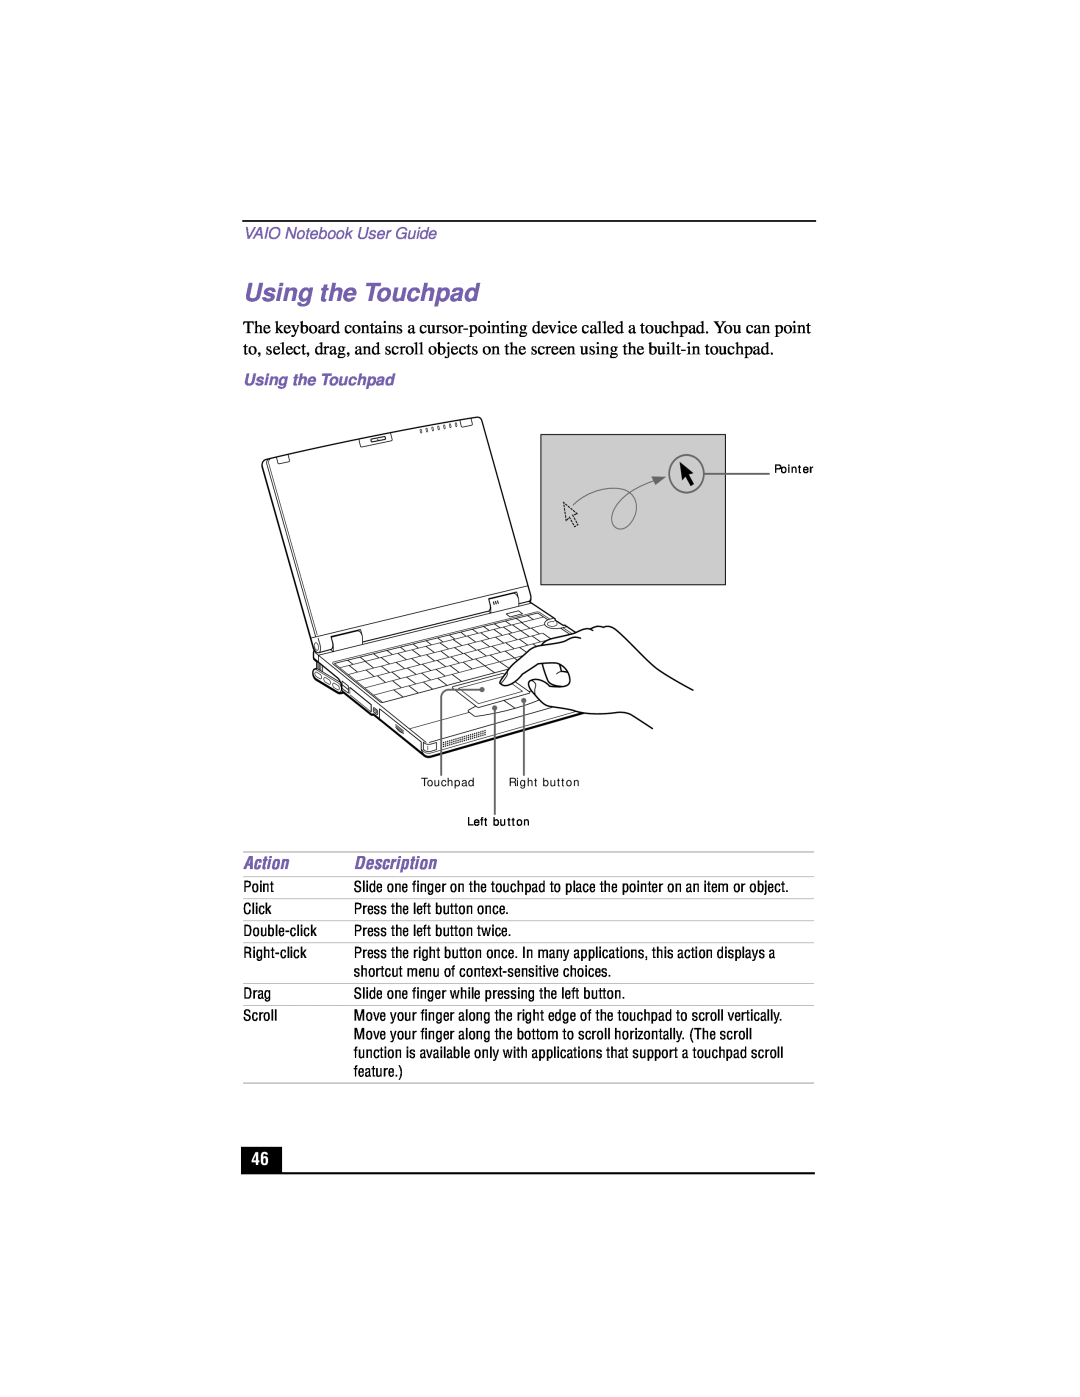 Sony PCG-XG500K, PCG-XG700K manual Using the Touchpad, Action, Description, VAIO Notebook User Guide 